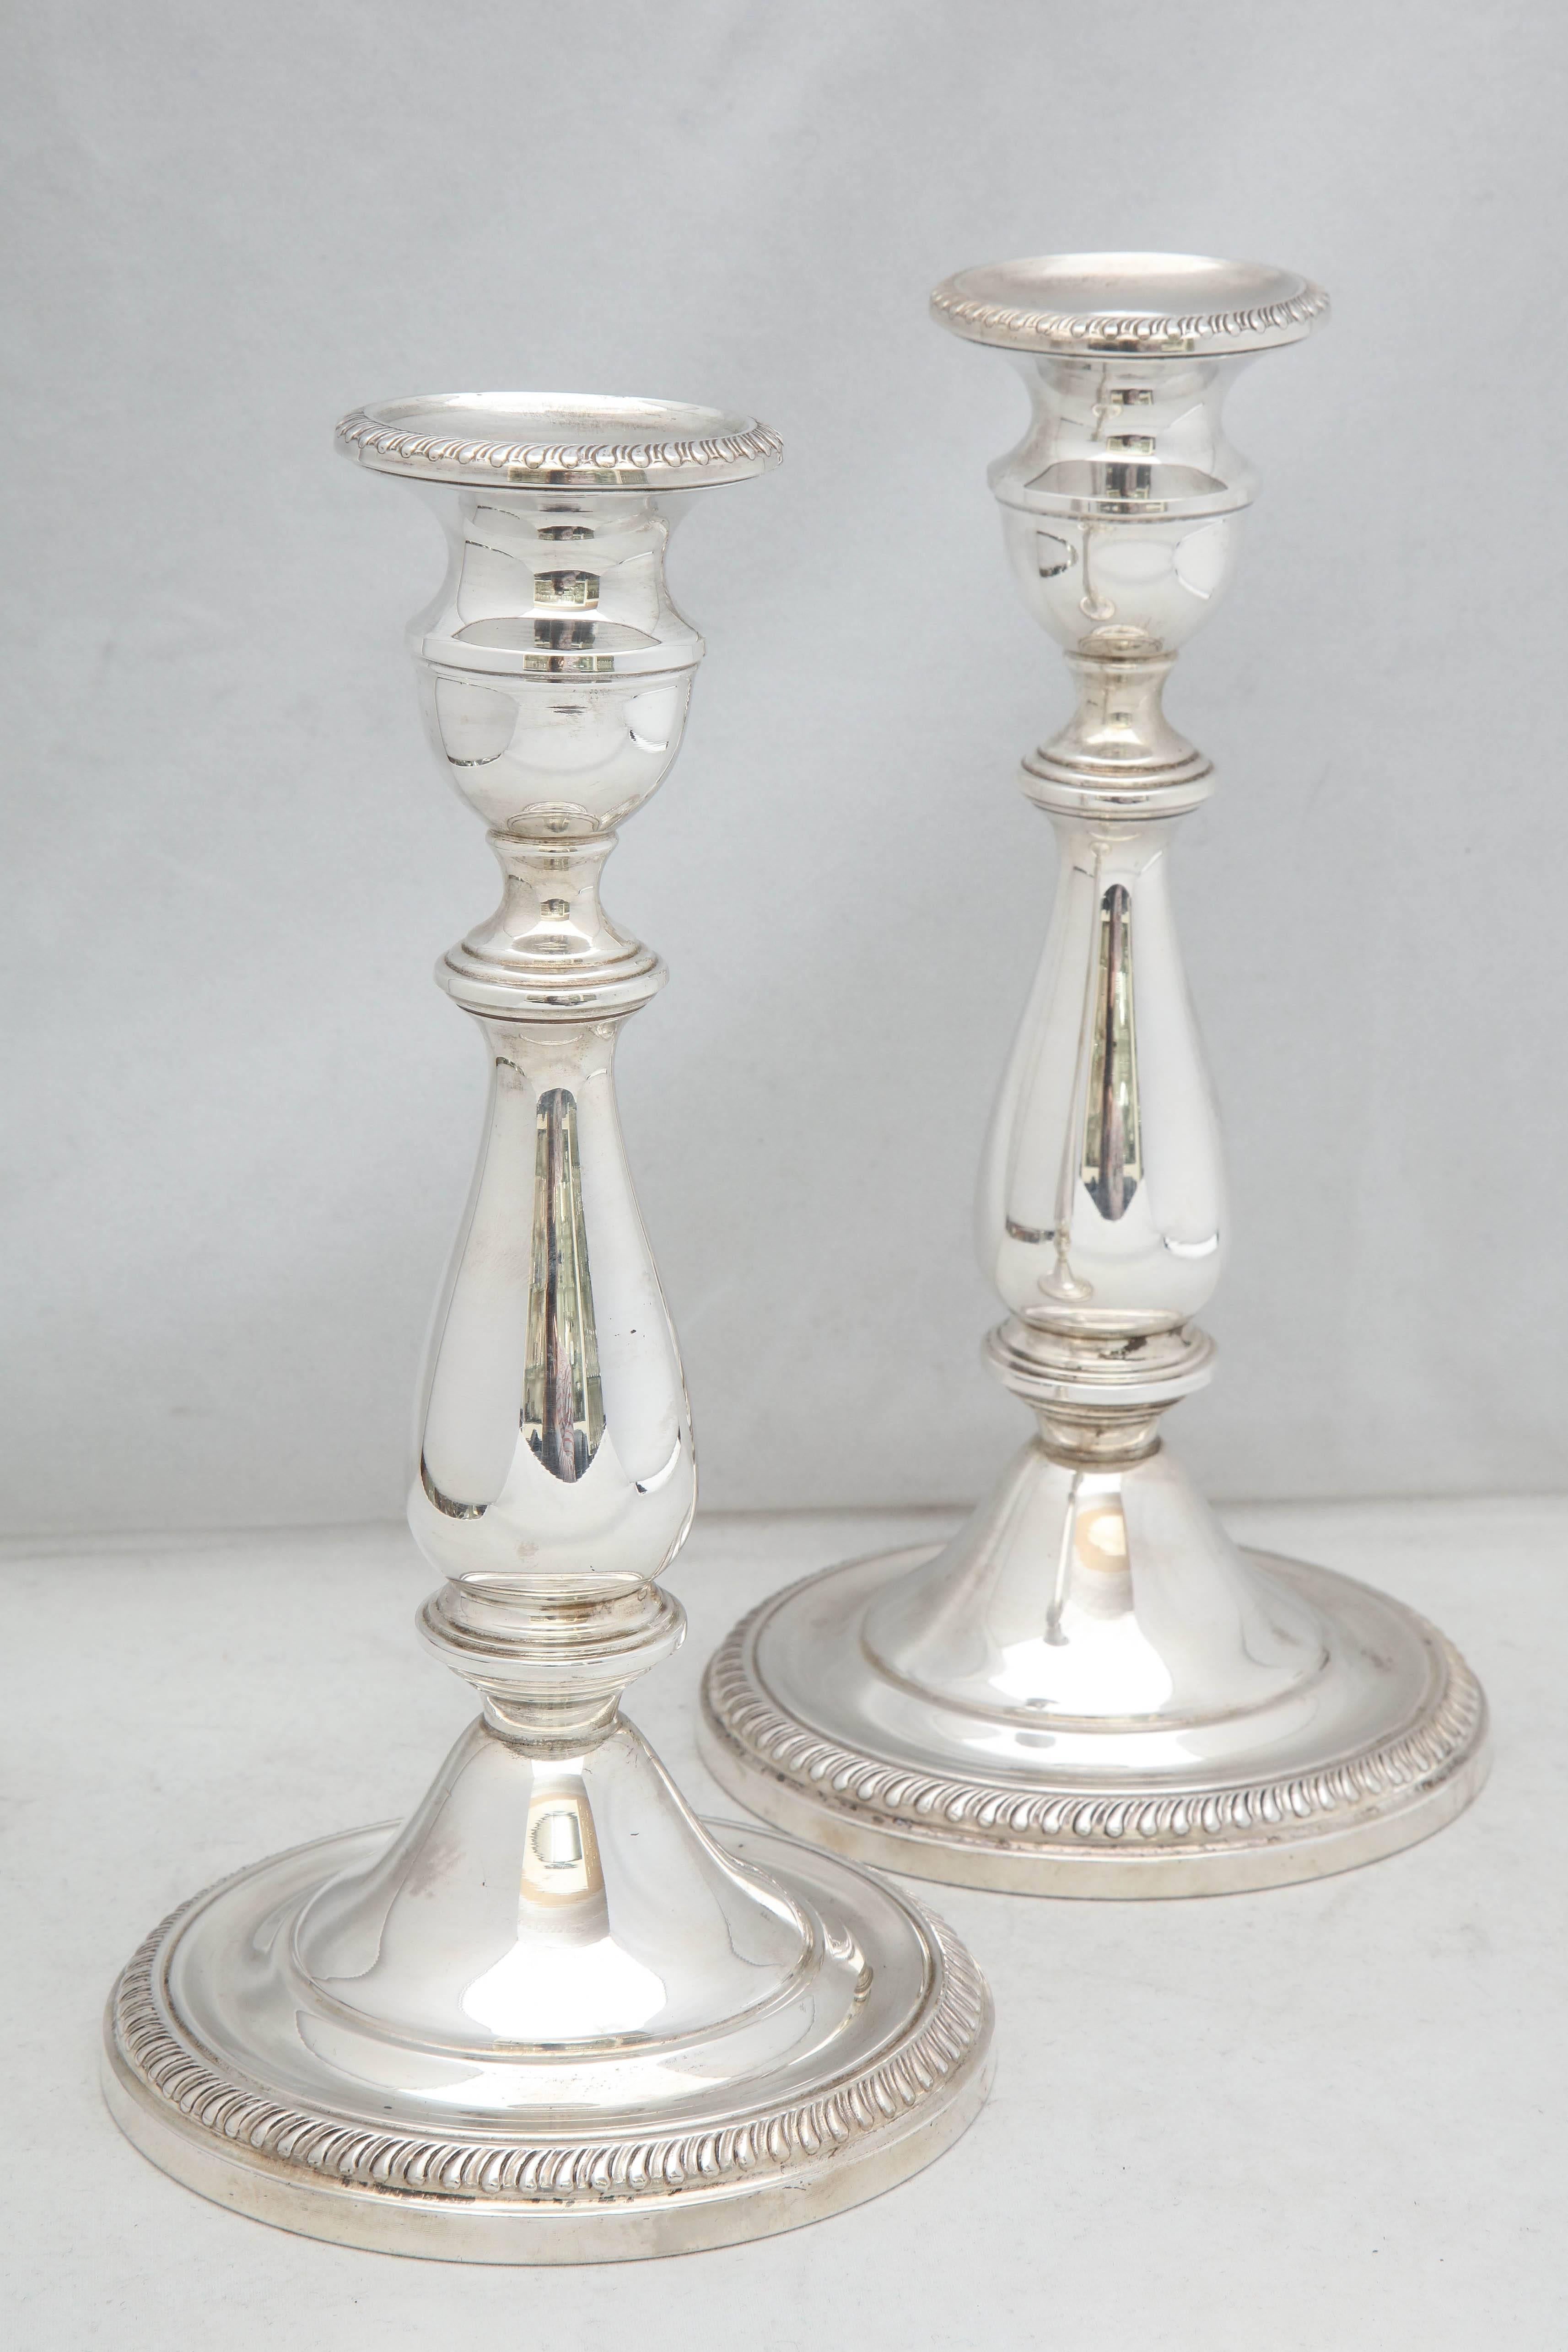 Pair of tall, sterling silver, Empire style candlesticks, The Mueck Carey Co. Inc., New York, circa 1930s. Measure: 9 inches high x 4 3/4 inches diameter across base of each. Weighted. Border of each candlestick base is decorated with a reeded